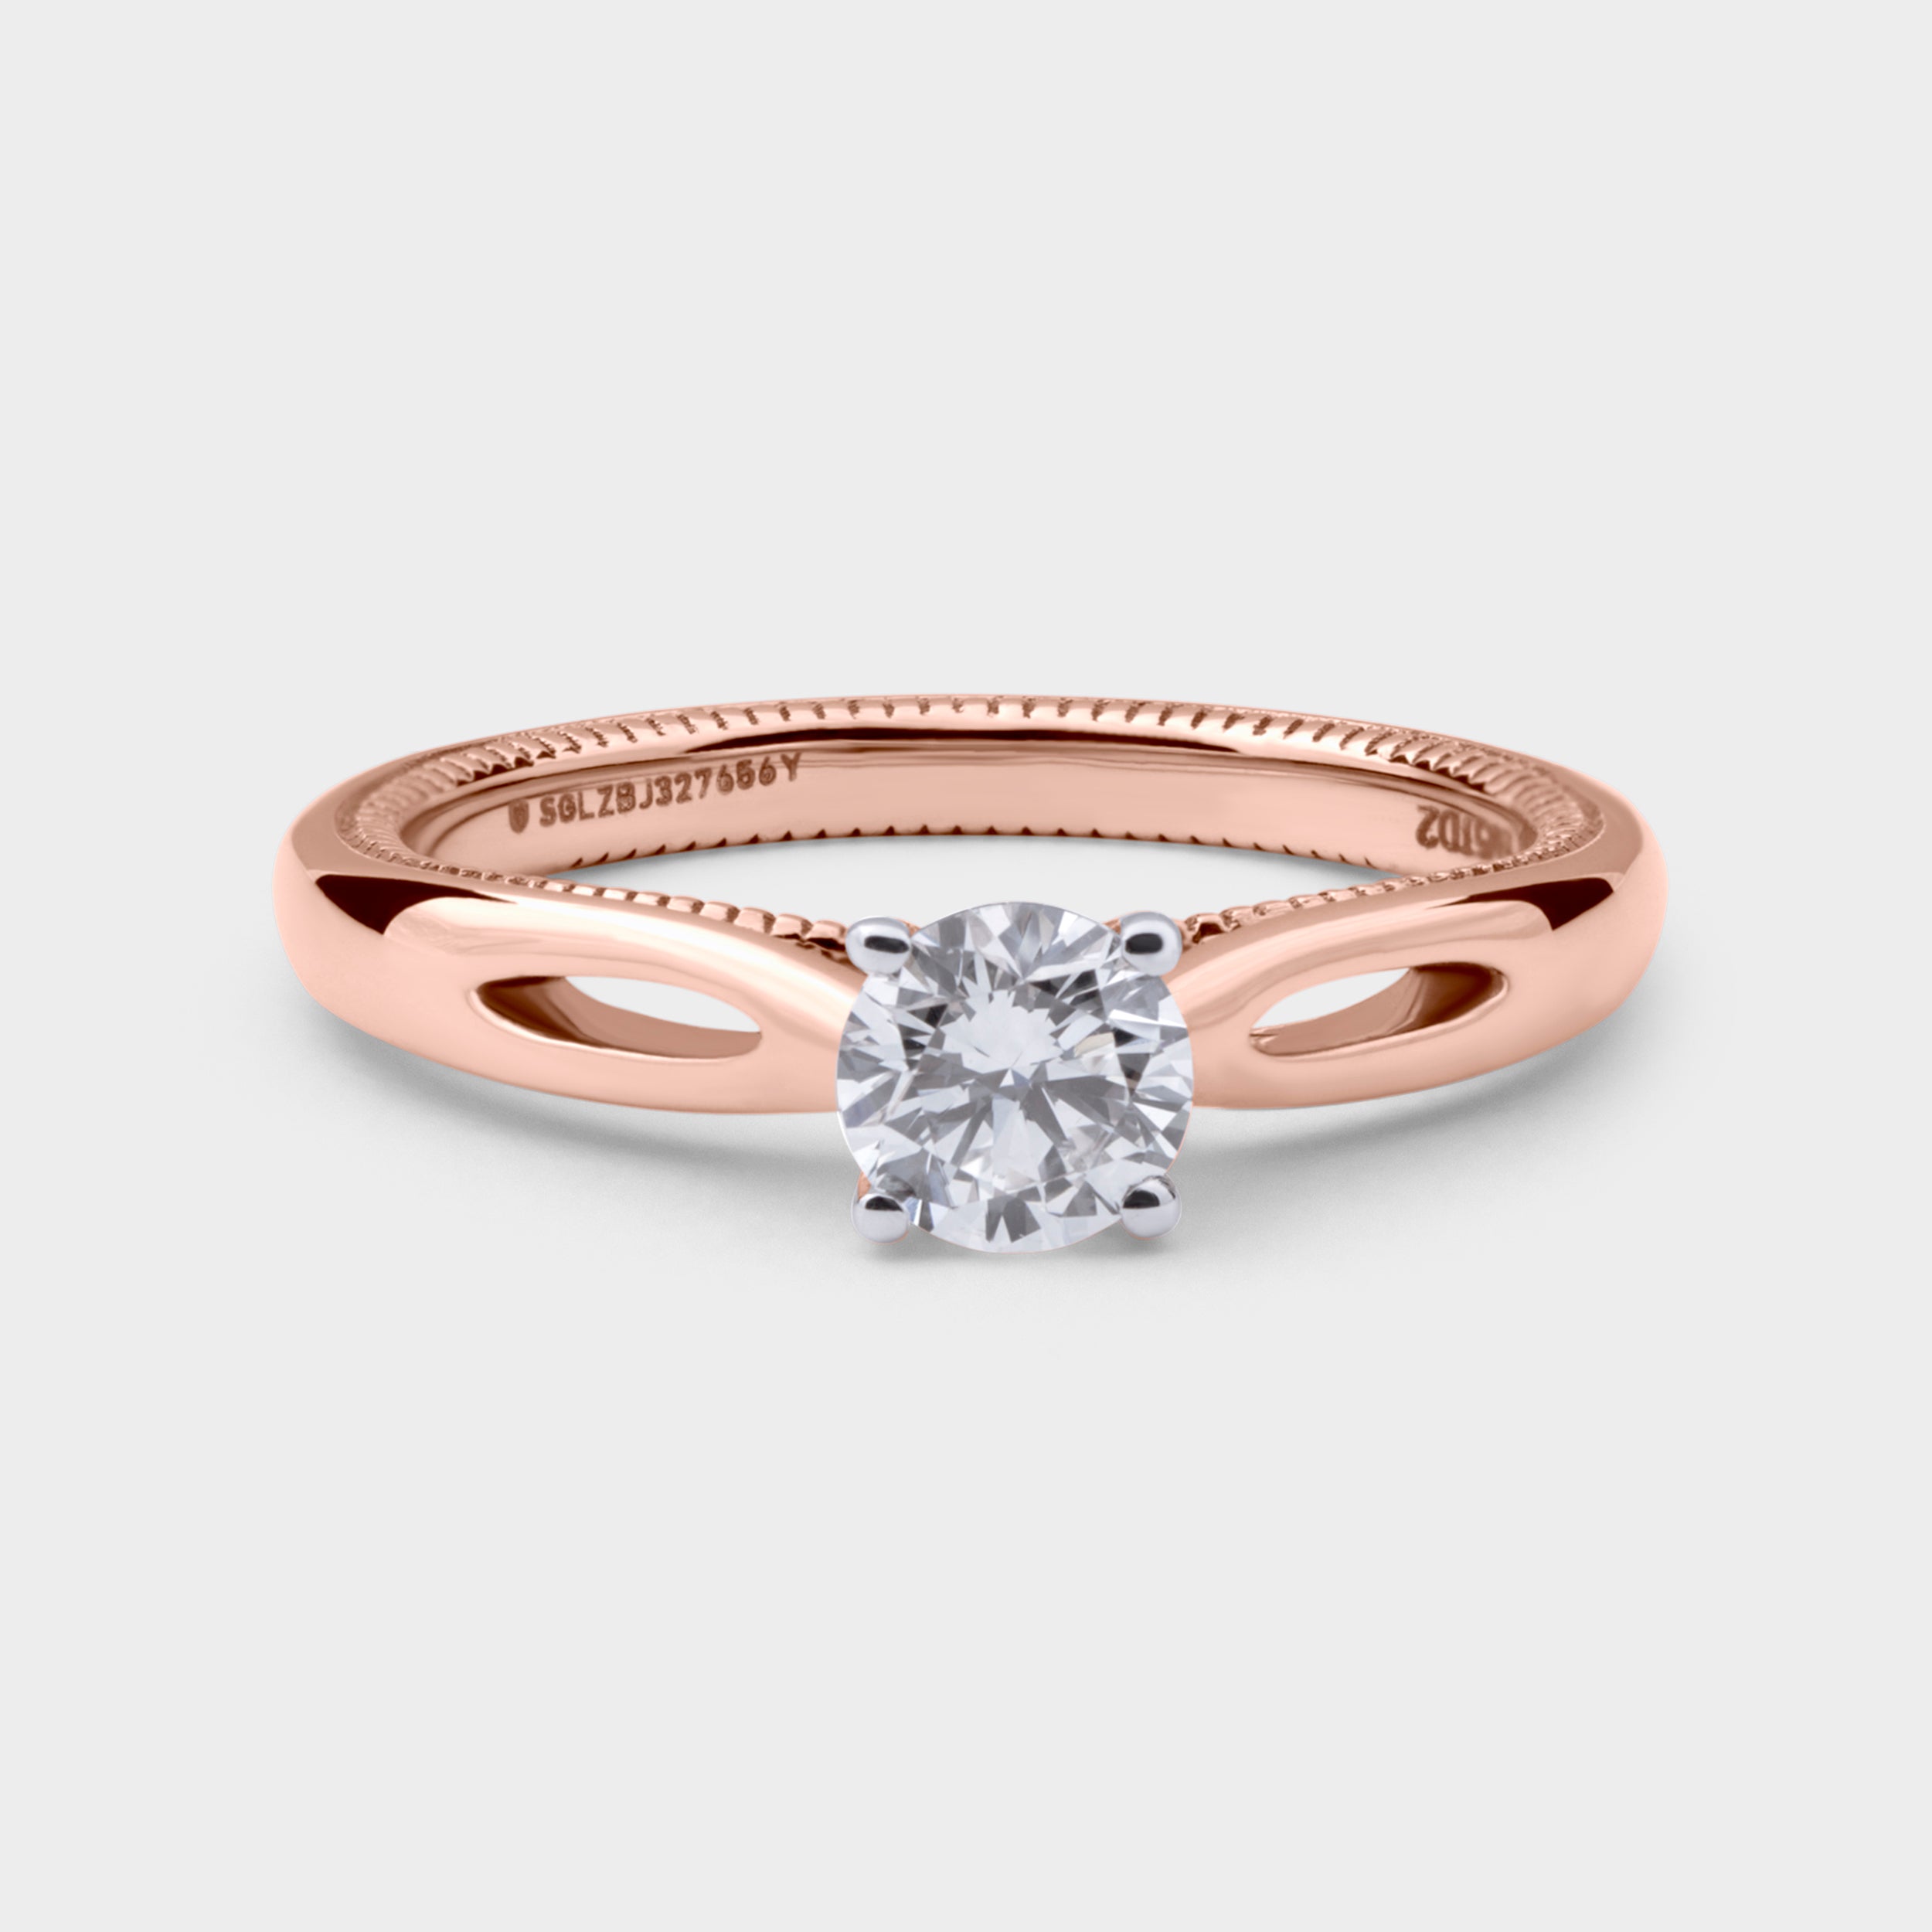 Round Brilliant 0.50 Carat Solitaire Lab-Grown Diamond Ring in Rose Gold | SKU : 0019828787